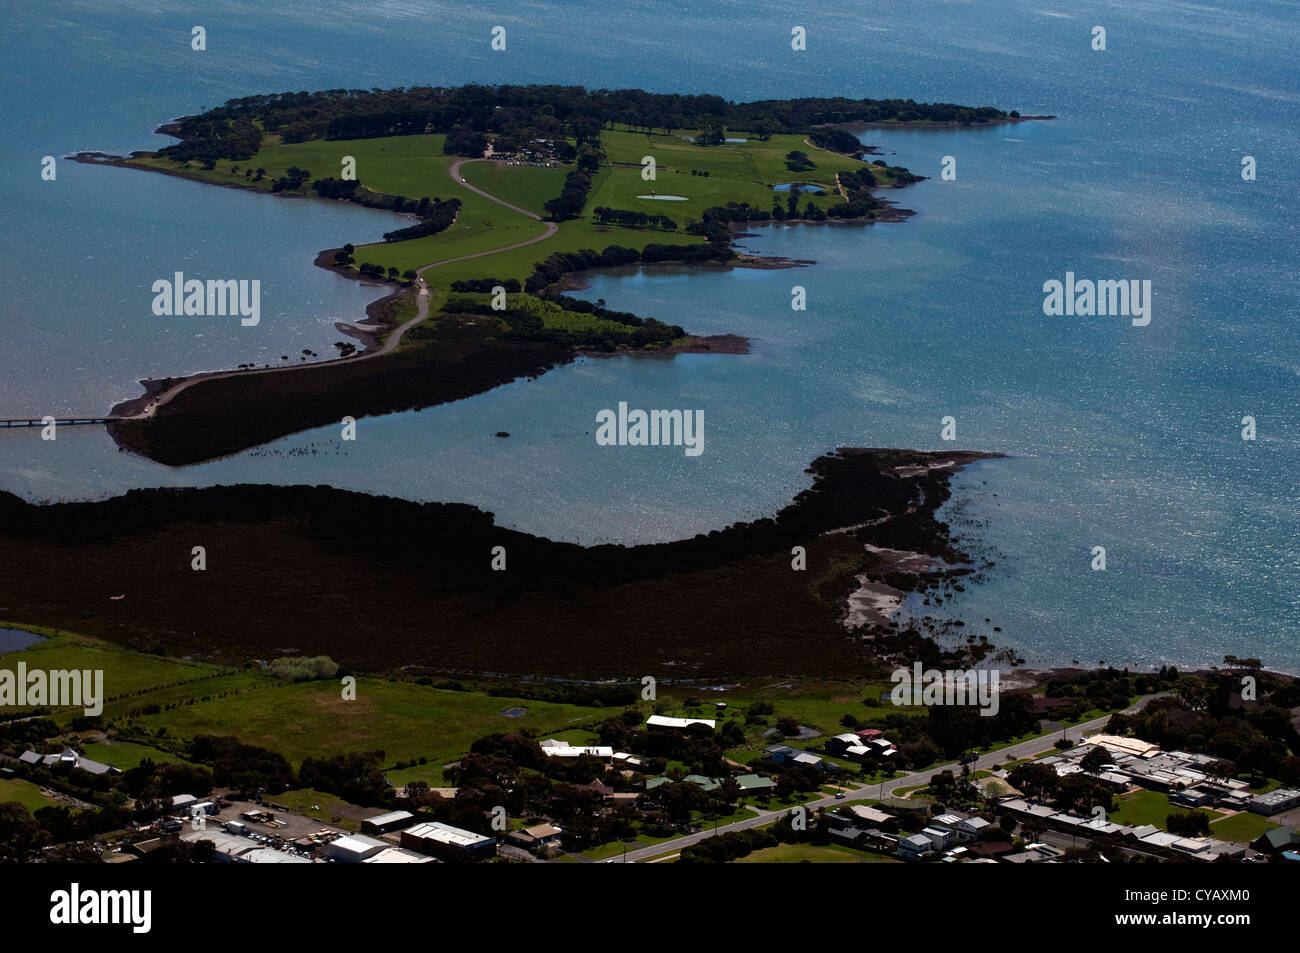 churchill island aerial view from a helicopter Stock Photo